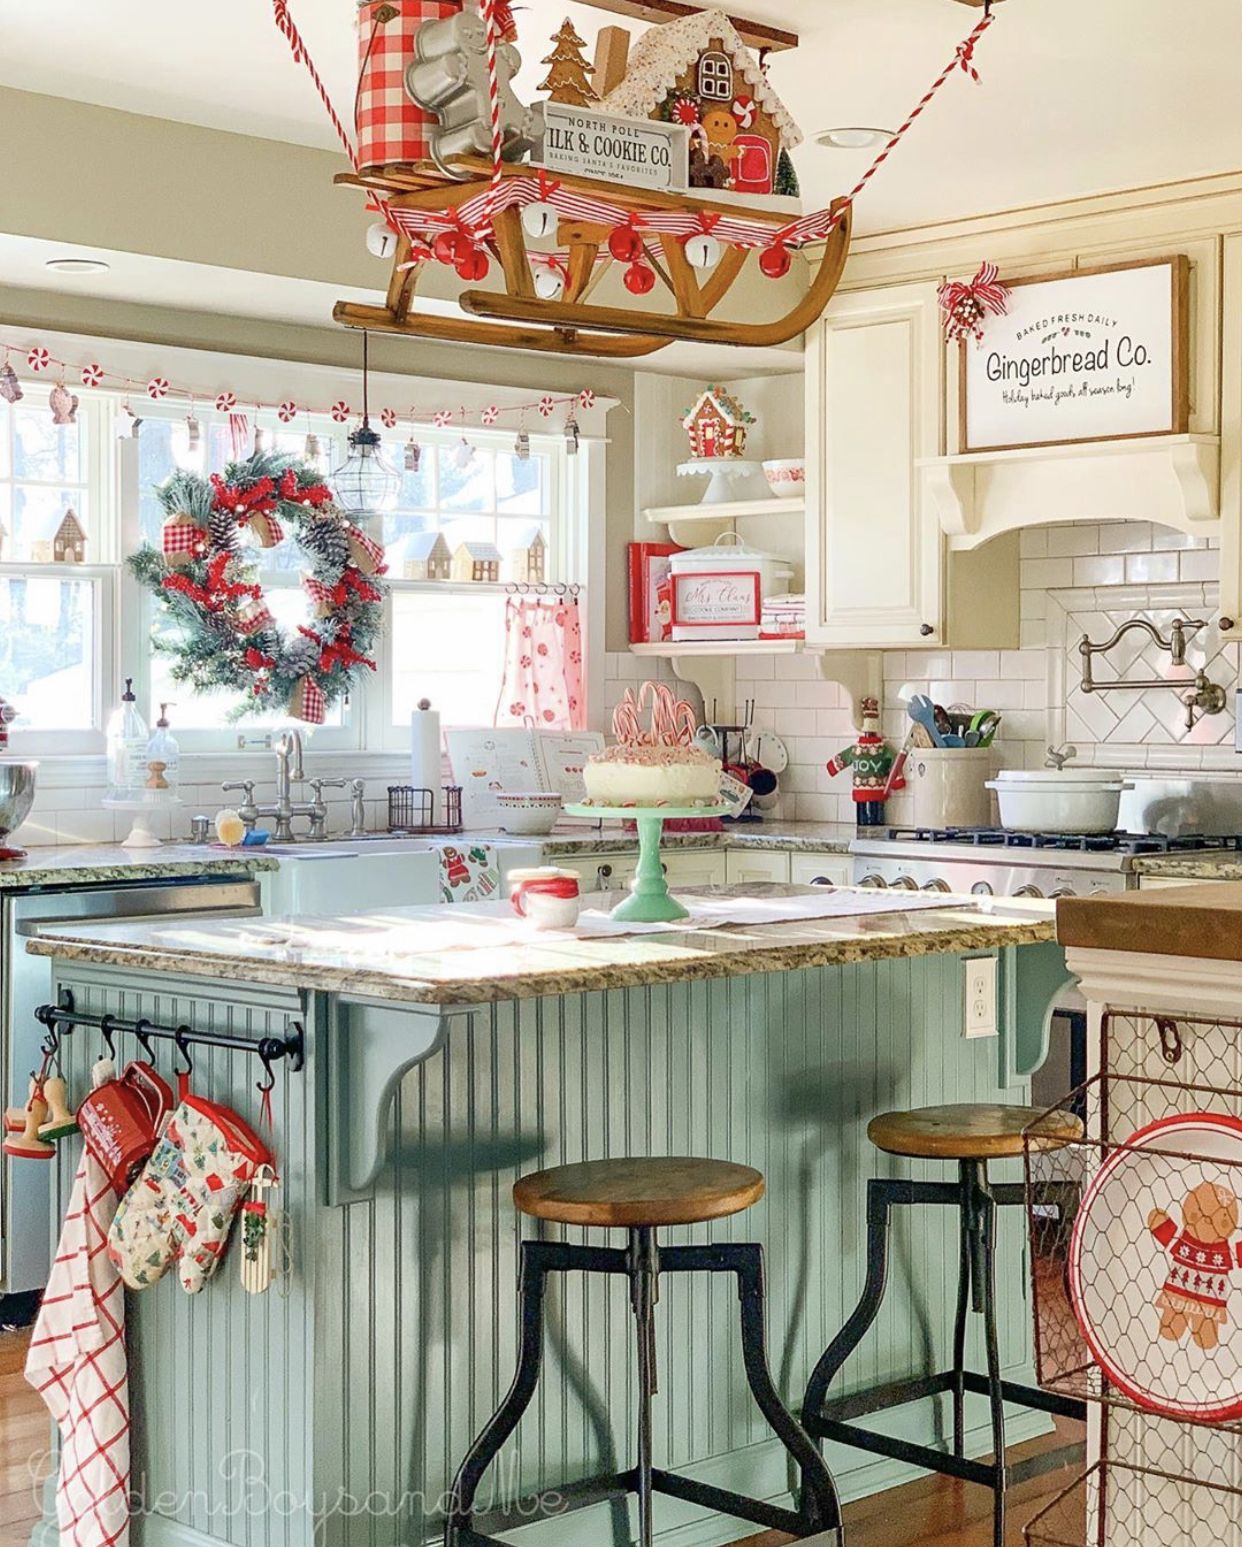 Give Your Kitchen Some Festive Cheer